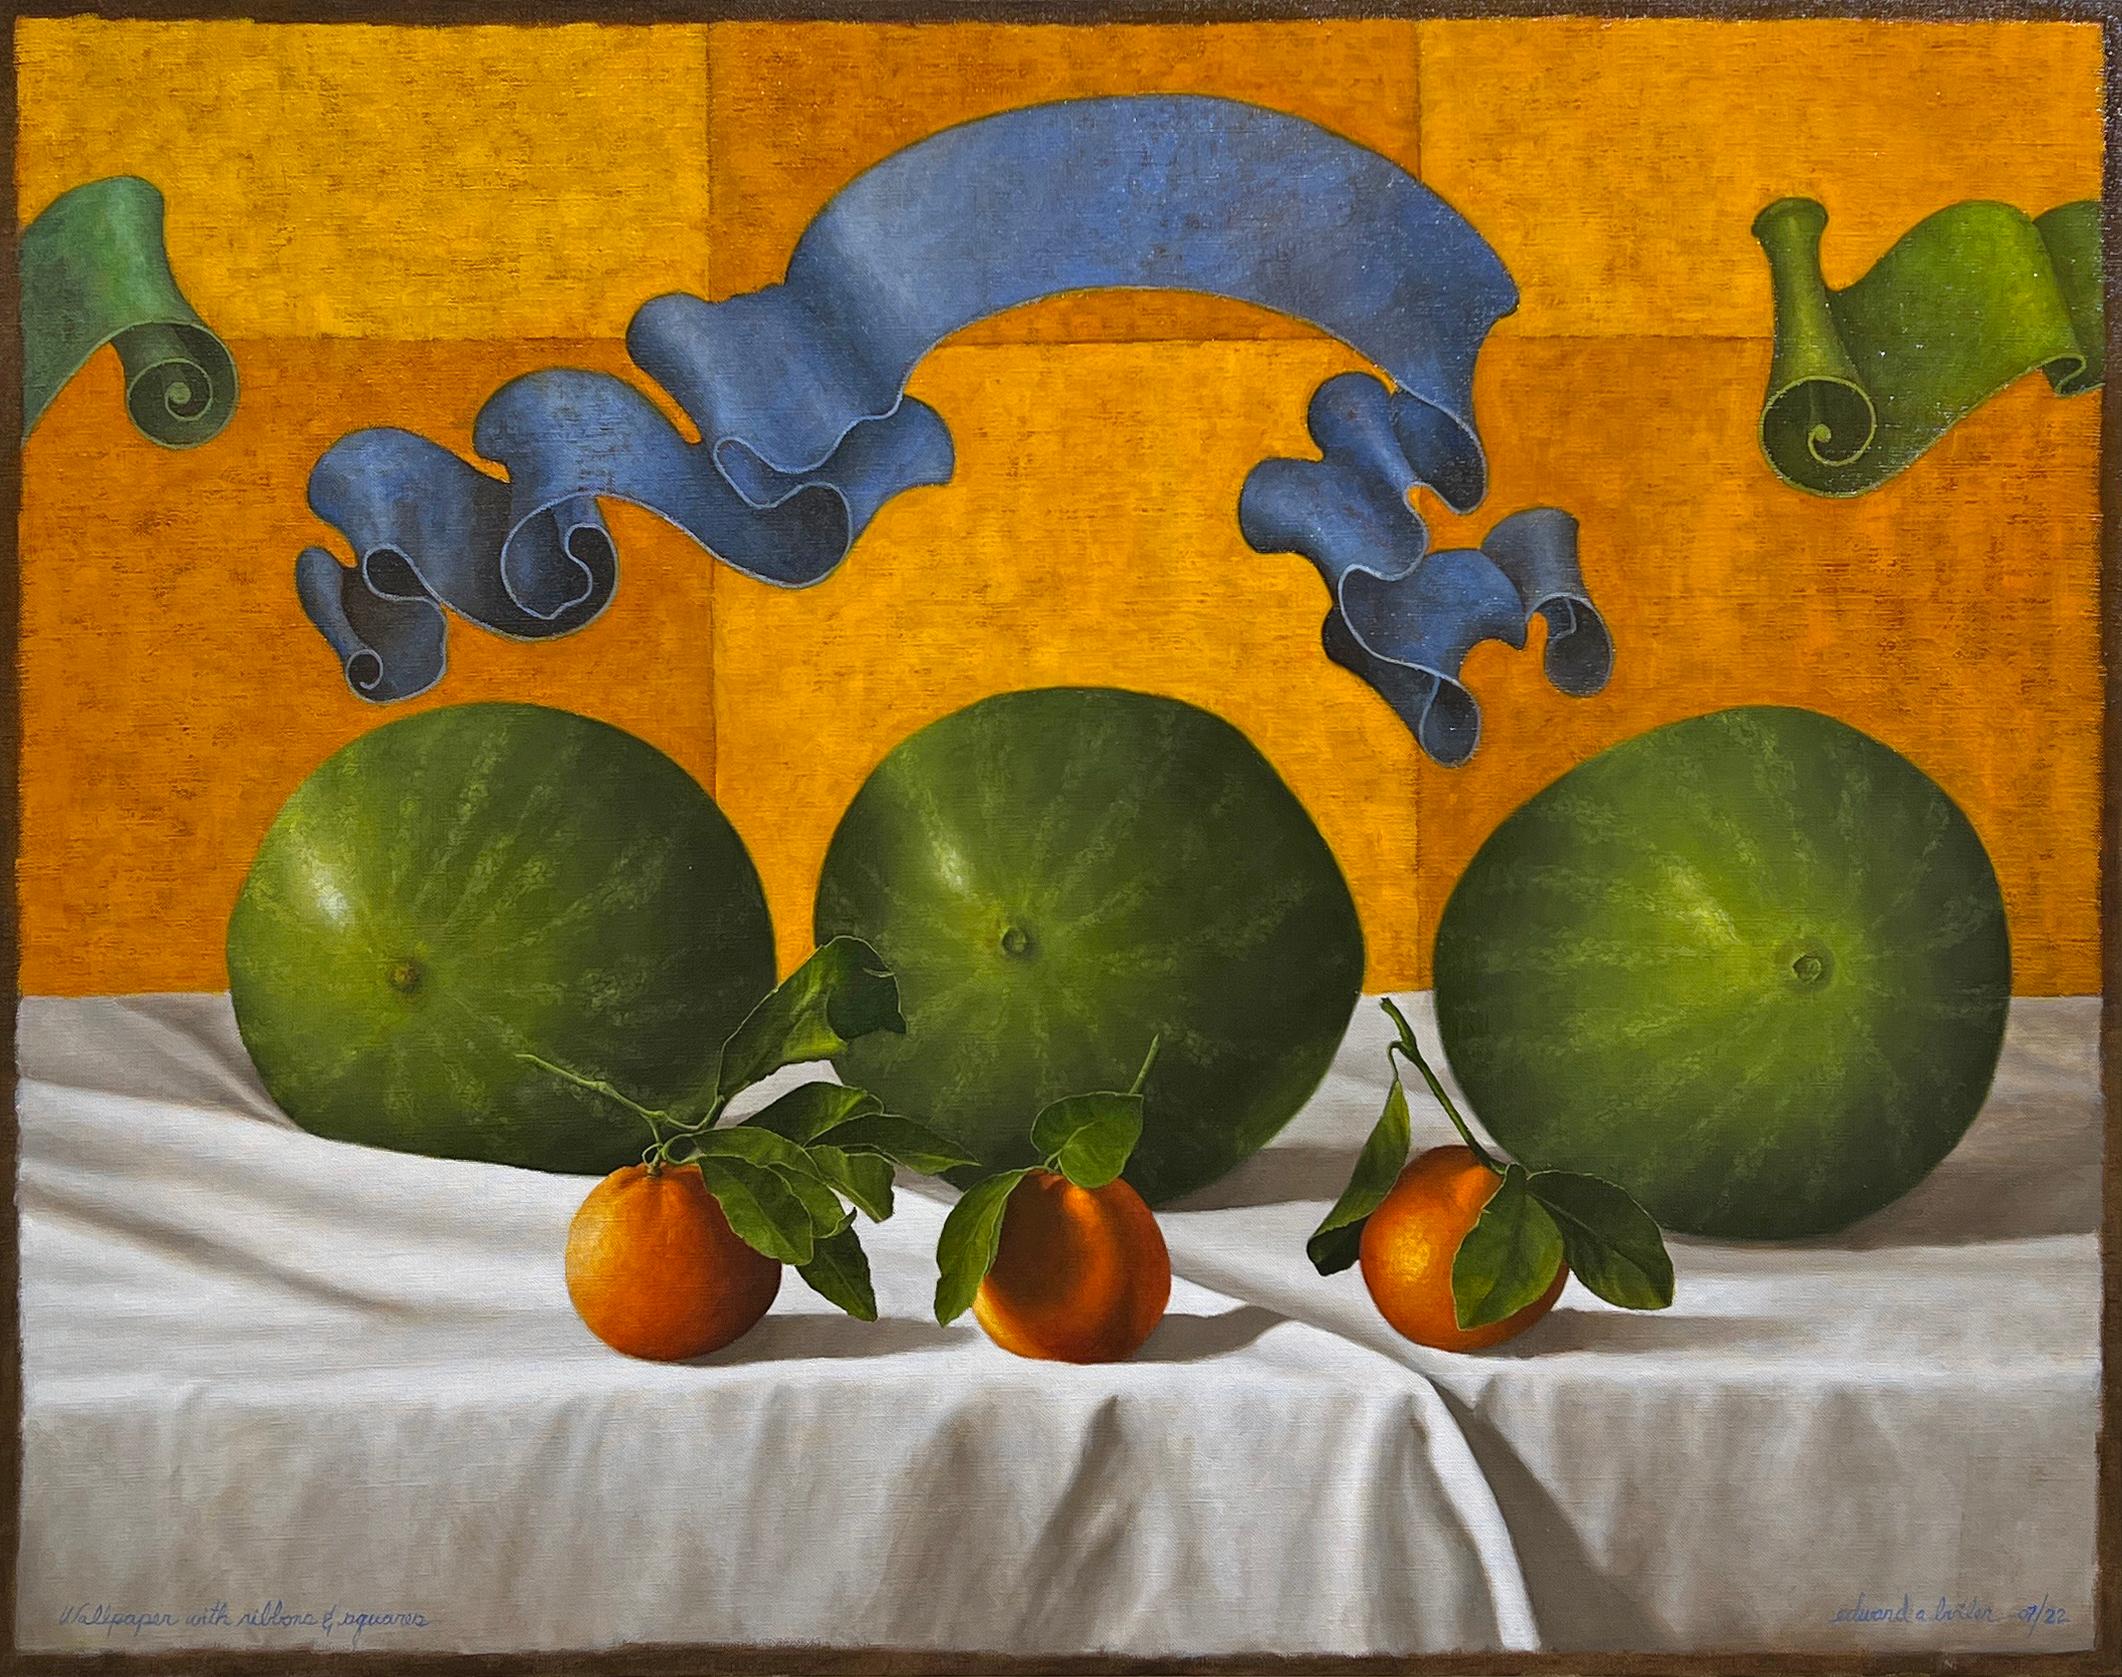 WALLPAPER WITH RIBBONS & SQUARES - Contemporary Still Life / Realism / Fruit